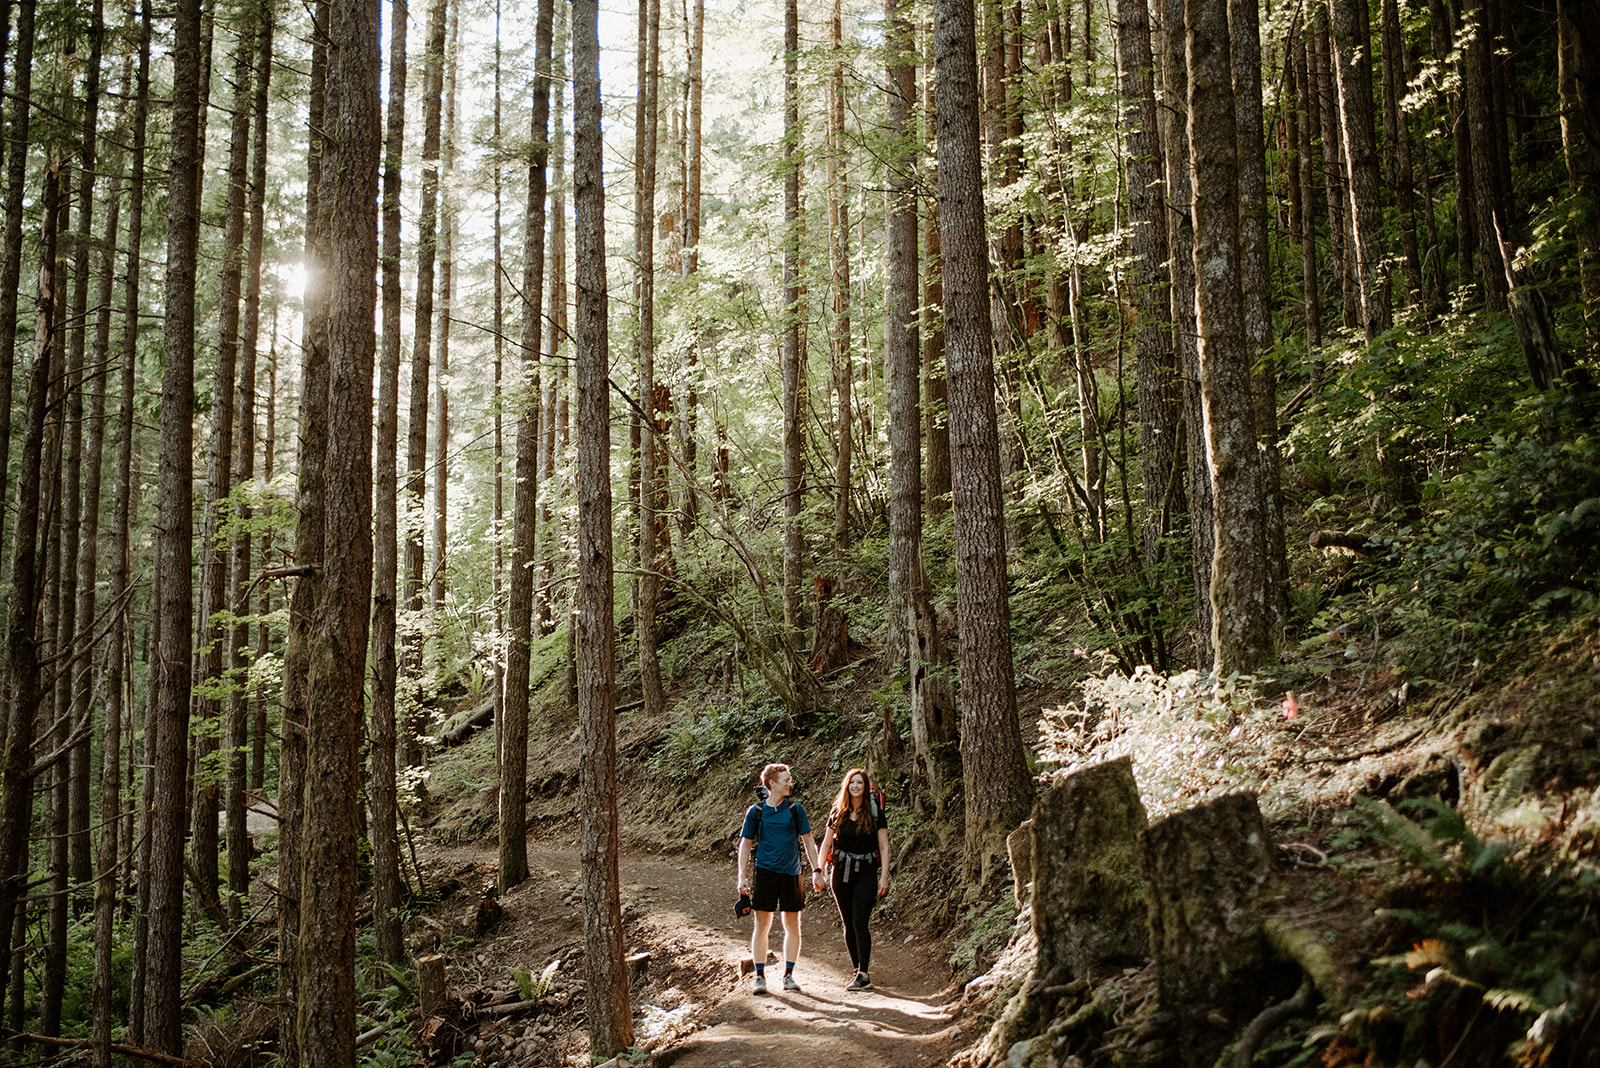 A couple hiking hand in hand along a forest trail, surrounded by tall trees and dappled sunlight.